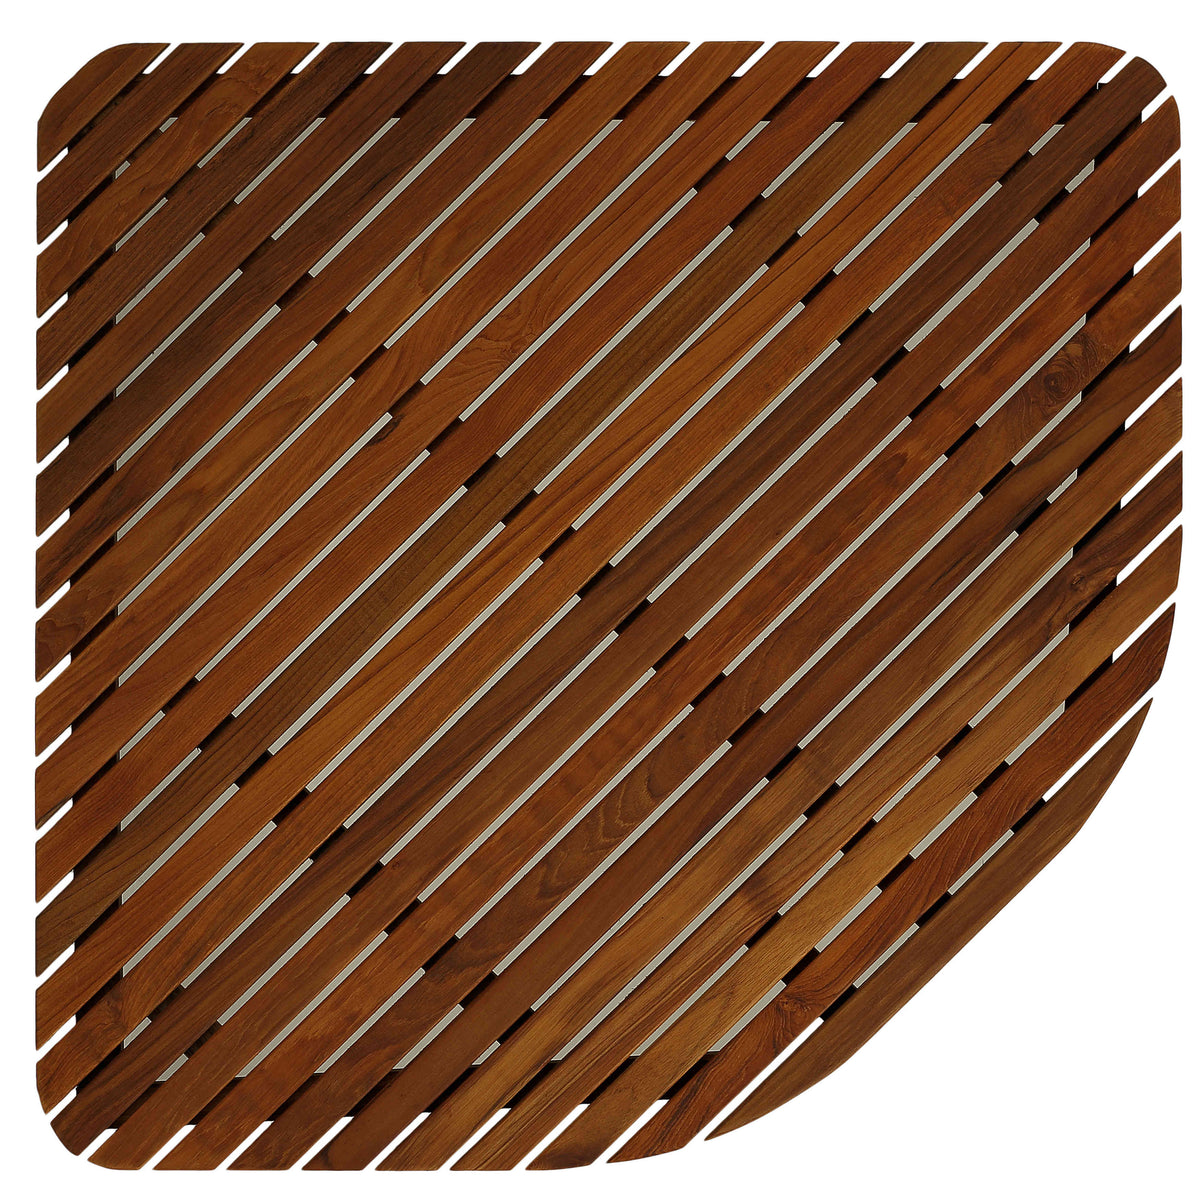 Bare Decor Erika Corner Shower Spa Mat in Solid Teak Wood and Oiled Finish, X-Large, 30&quot; x 30&quot;